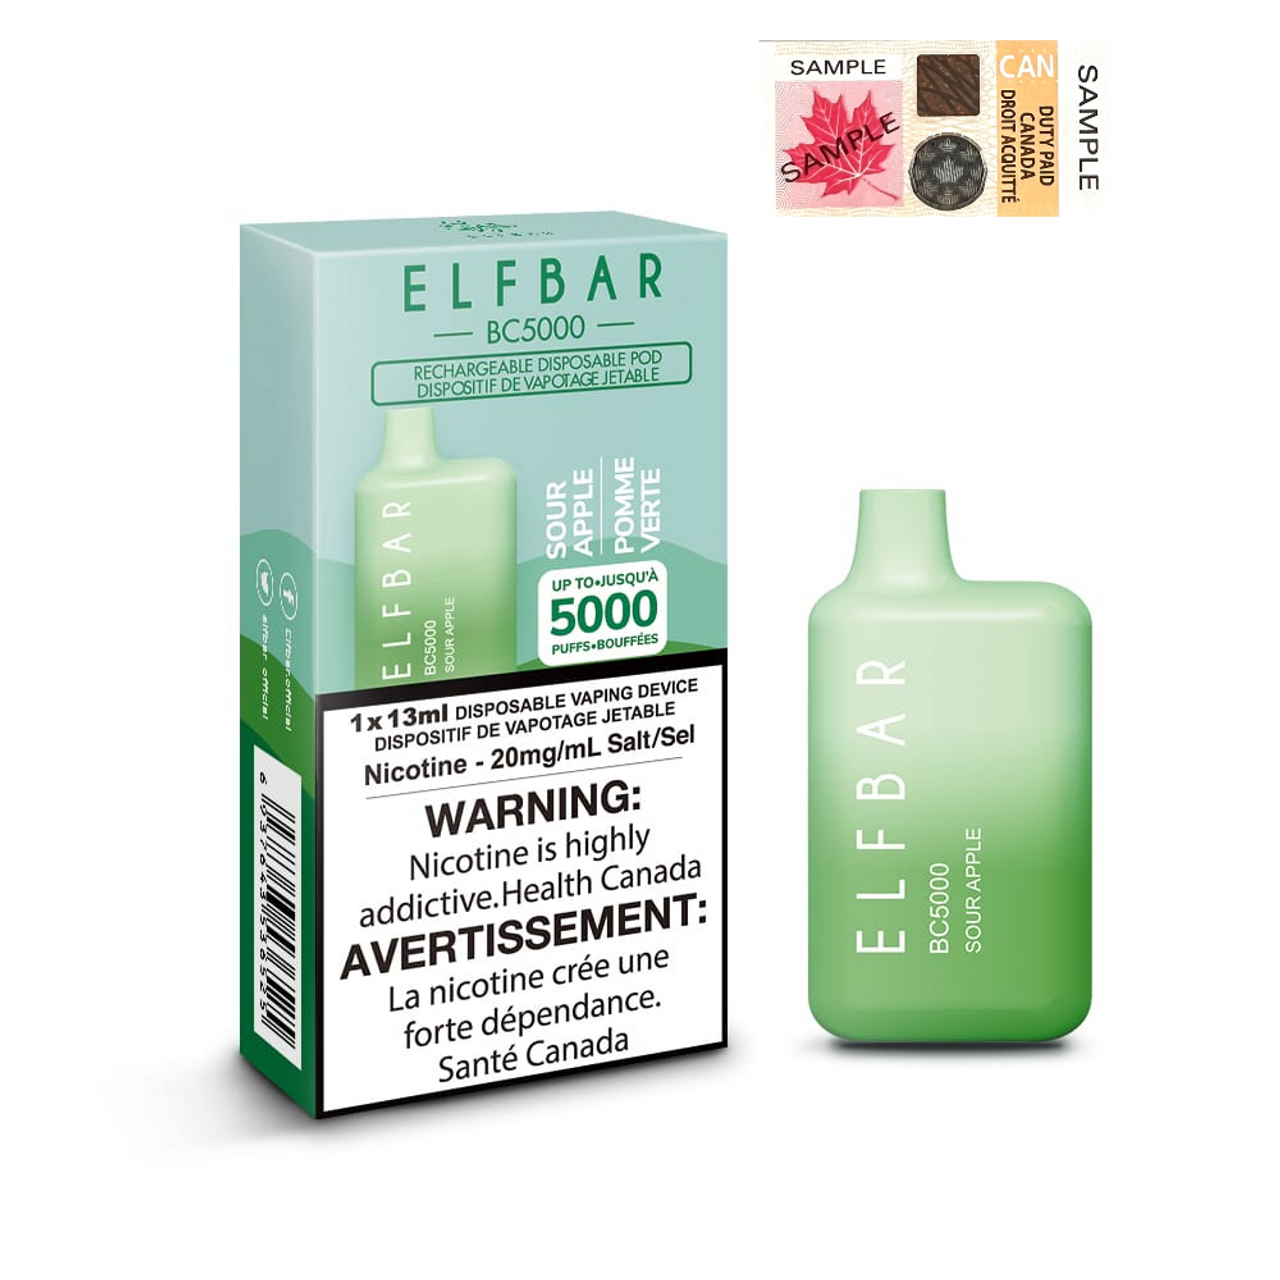 (Stamped) Elfbar Sour Apple 5000 Puffs Disposable Vape Ct 10